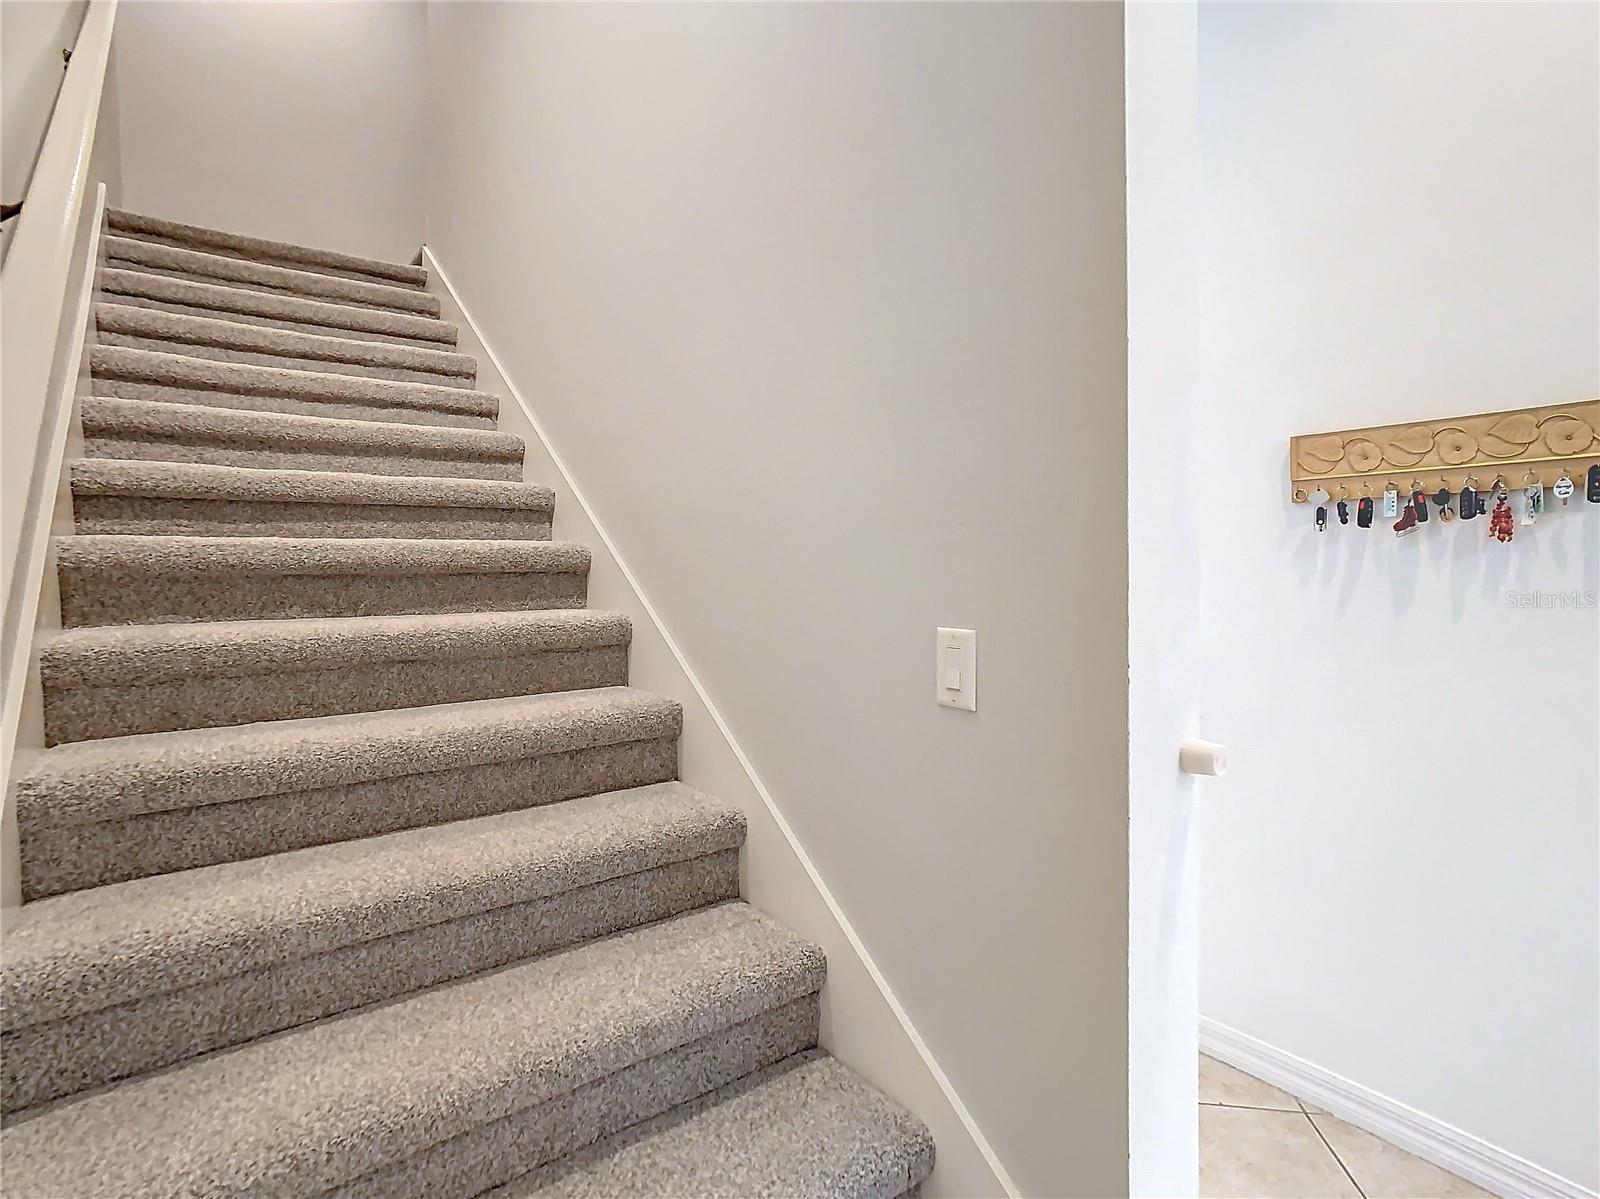 Brand new carpet on stairs and in loft area 5th BR